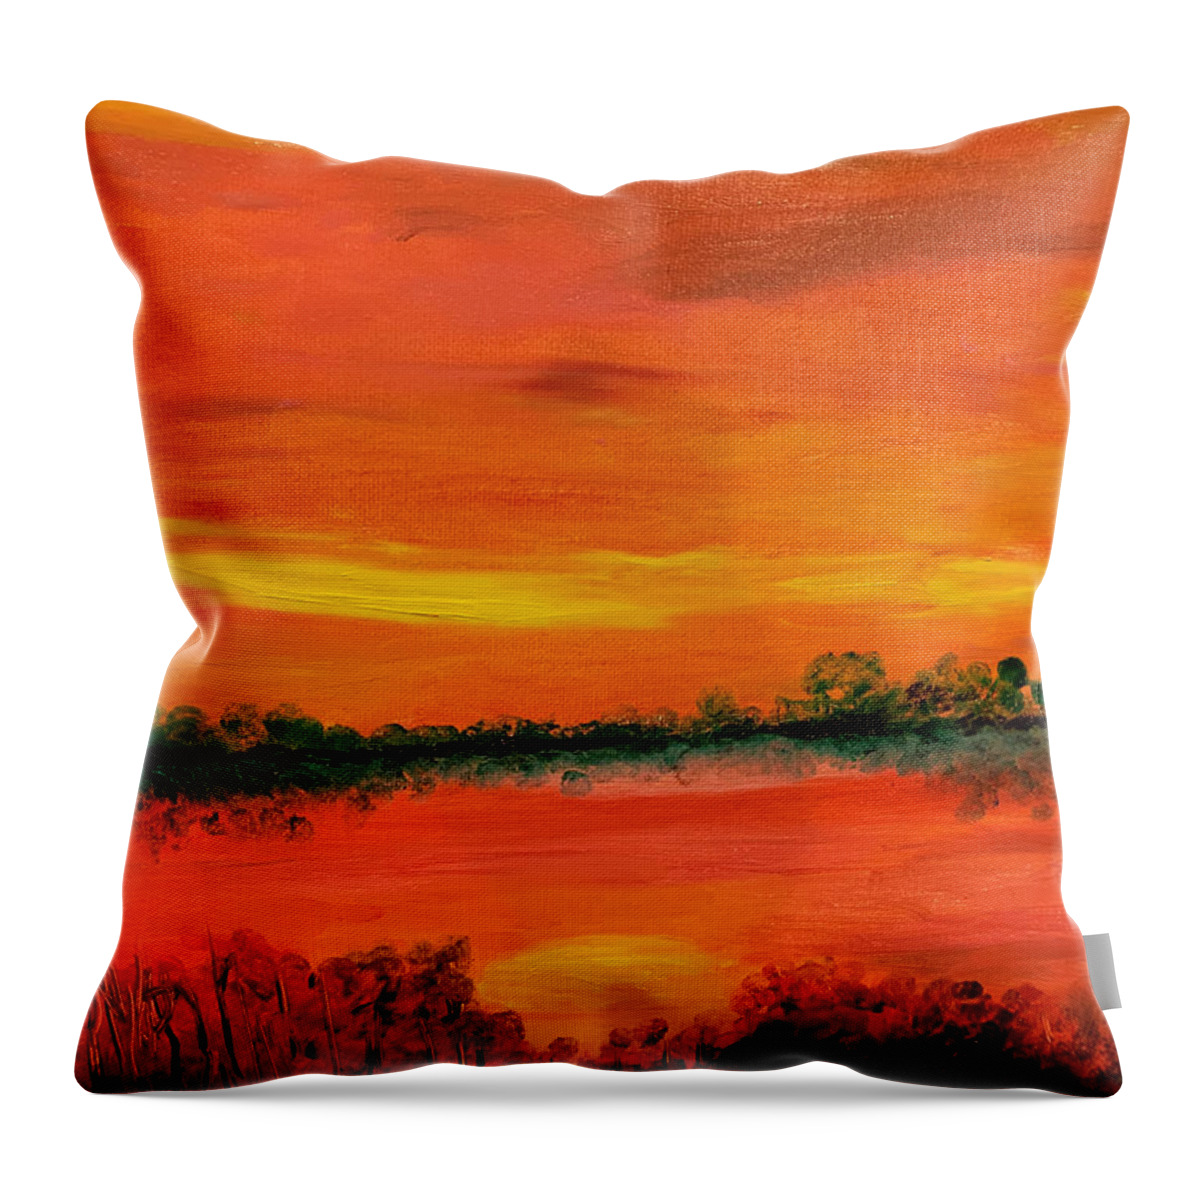 Sunset Throw Pillow featuring the painting Red Sky by Susan Grunin